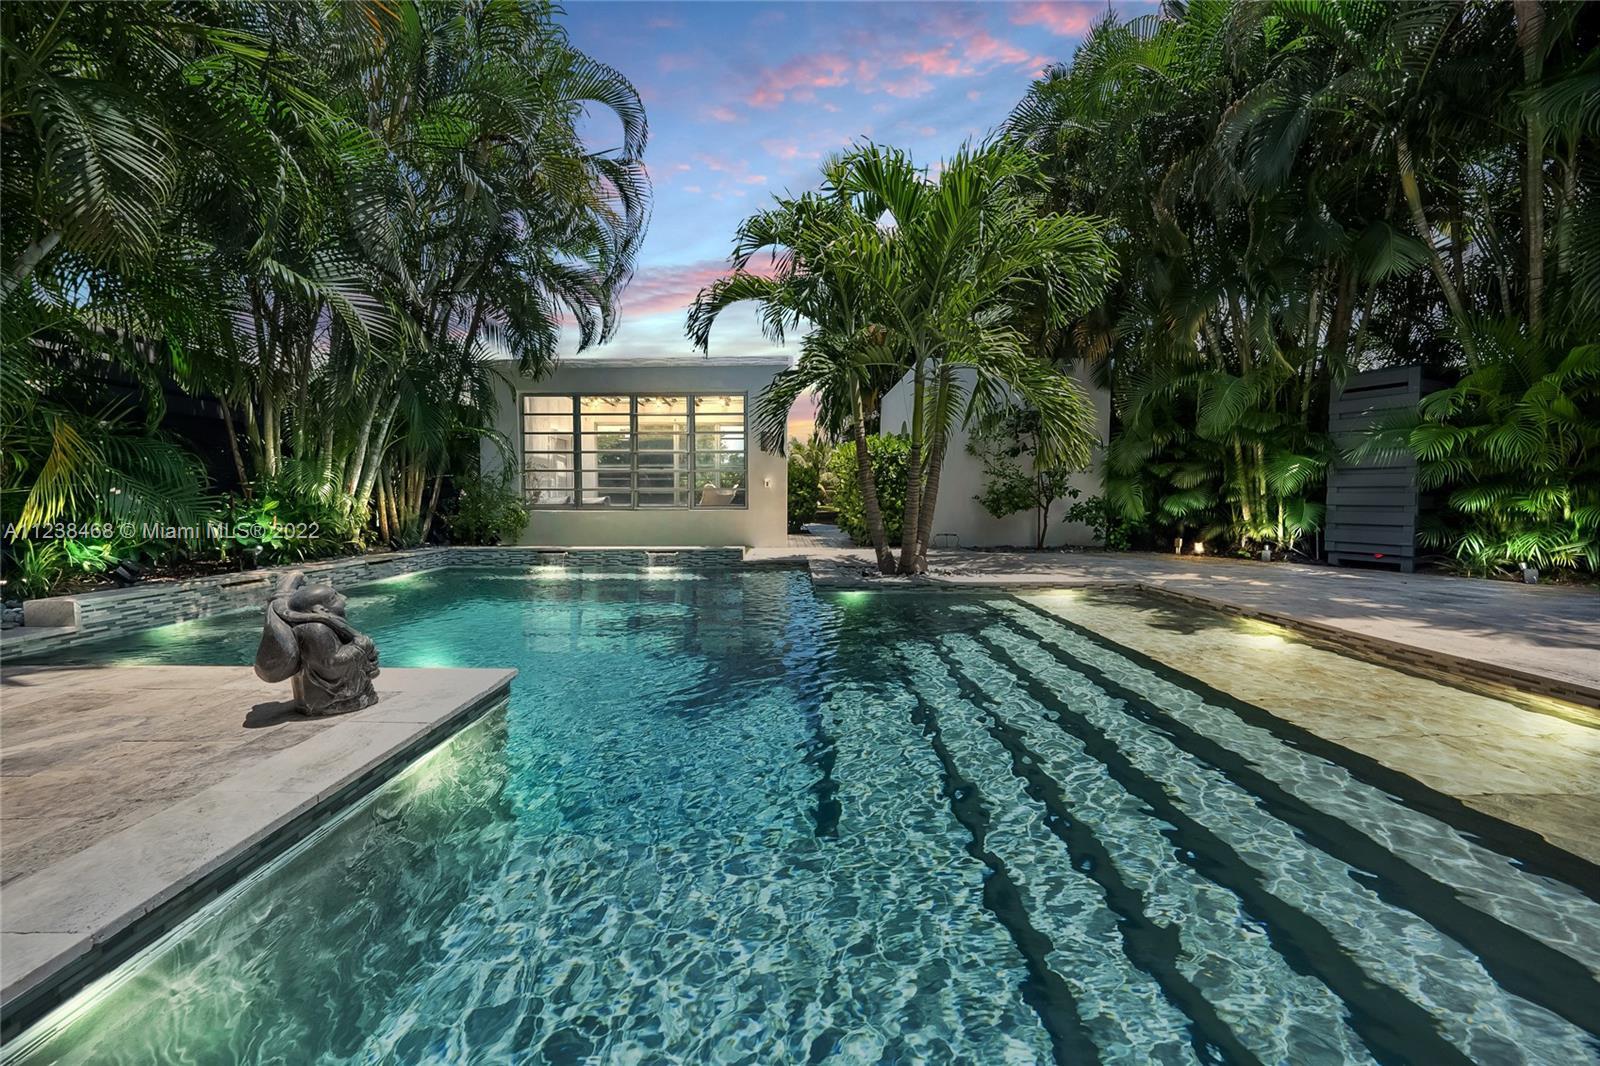 Welcome to this private & secluded oversized lot w/ the most incredible luscious backyard, massive p